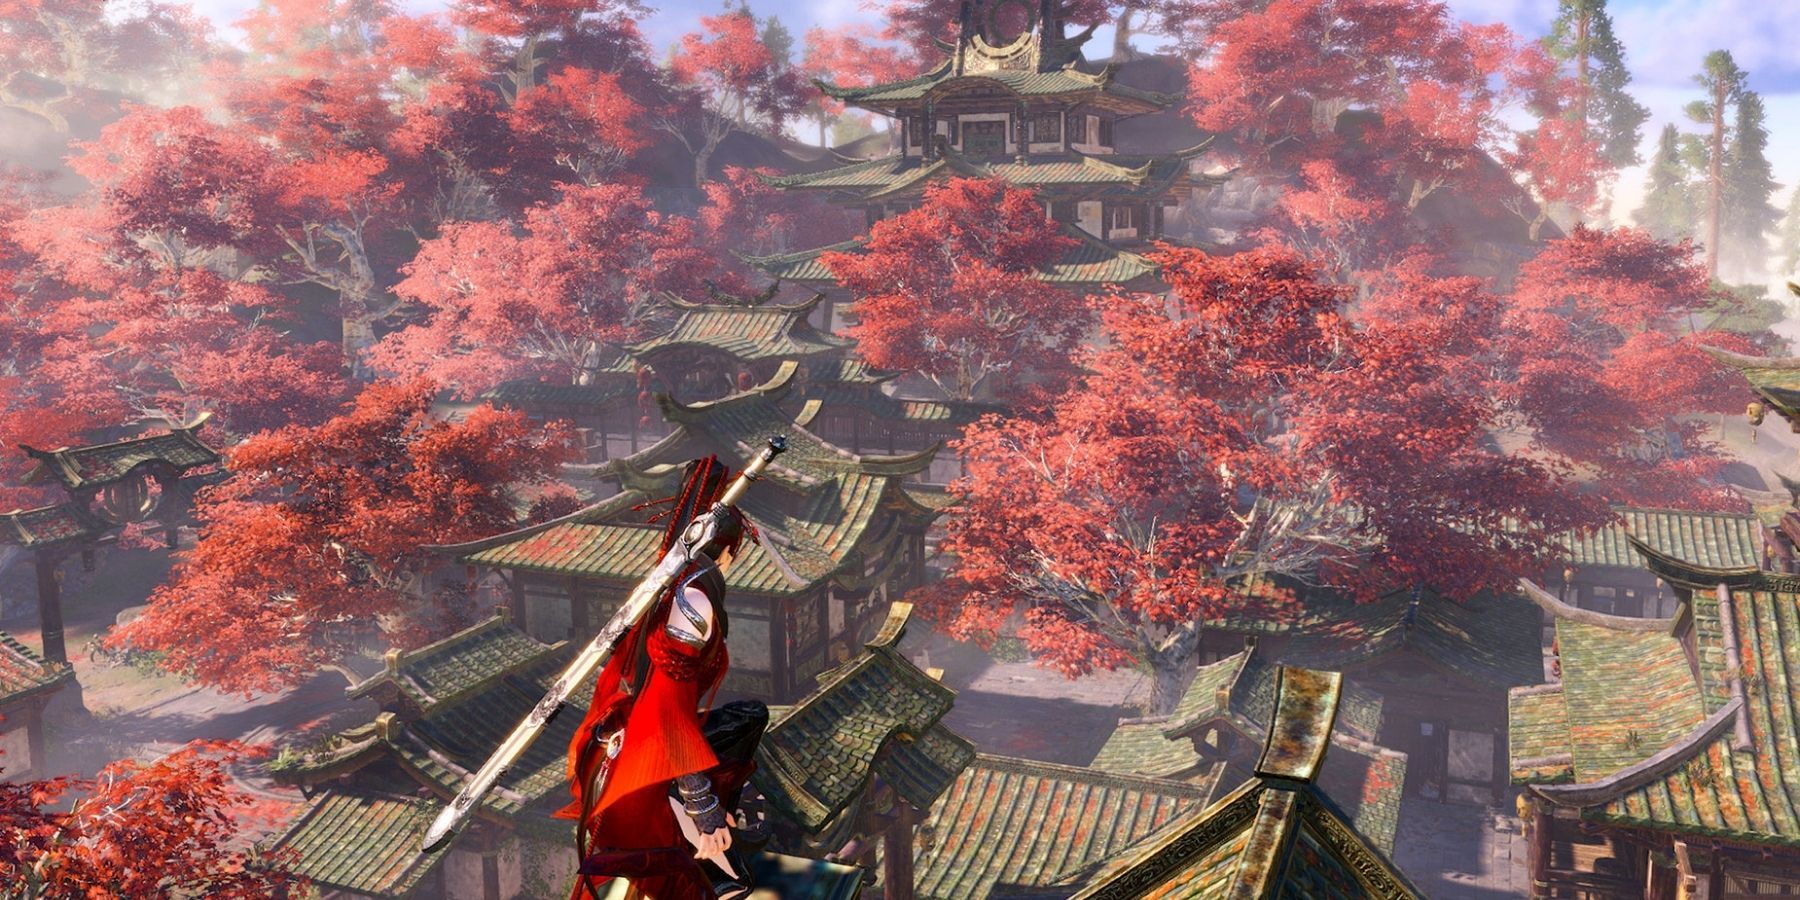 player looking over village with several cherry blossom trees